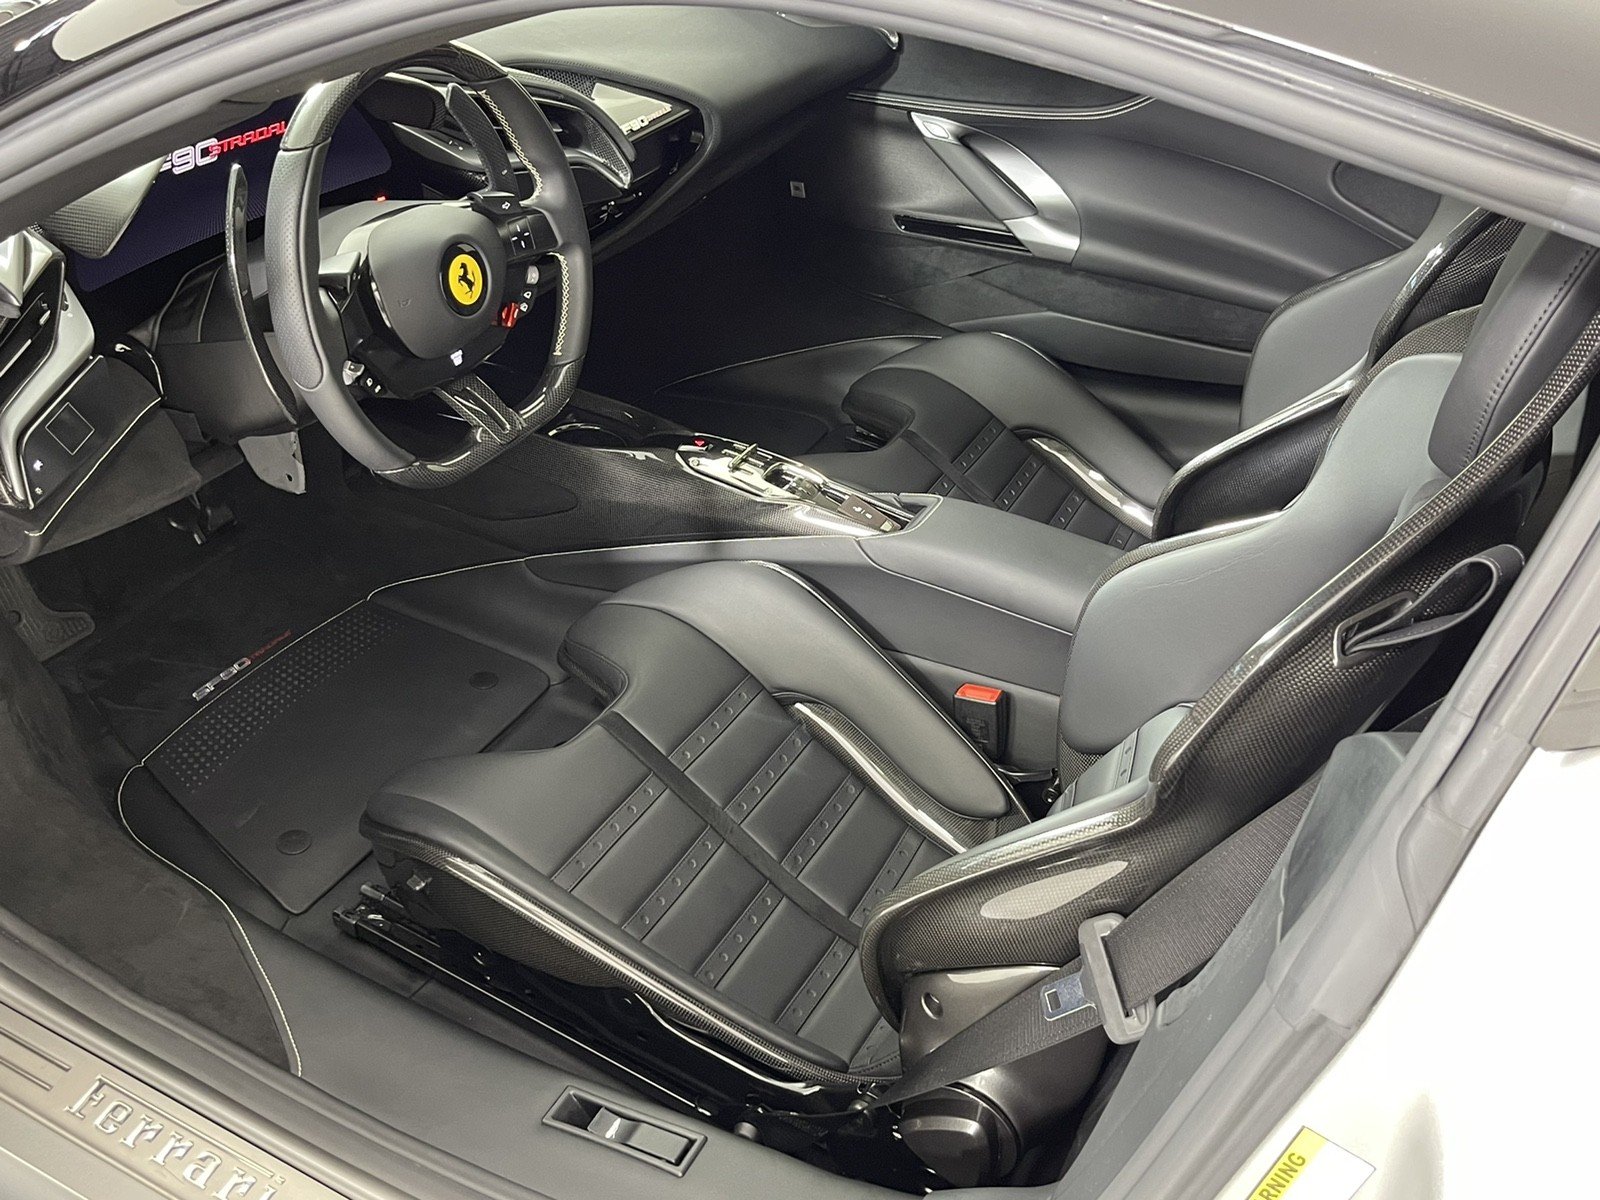 USED 2021 FERRARI SF90 STRADALE COUPE W A 650K MSRP FOR SALE (17)